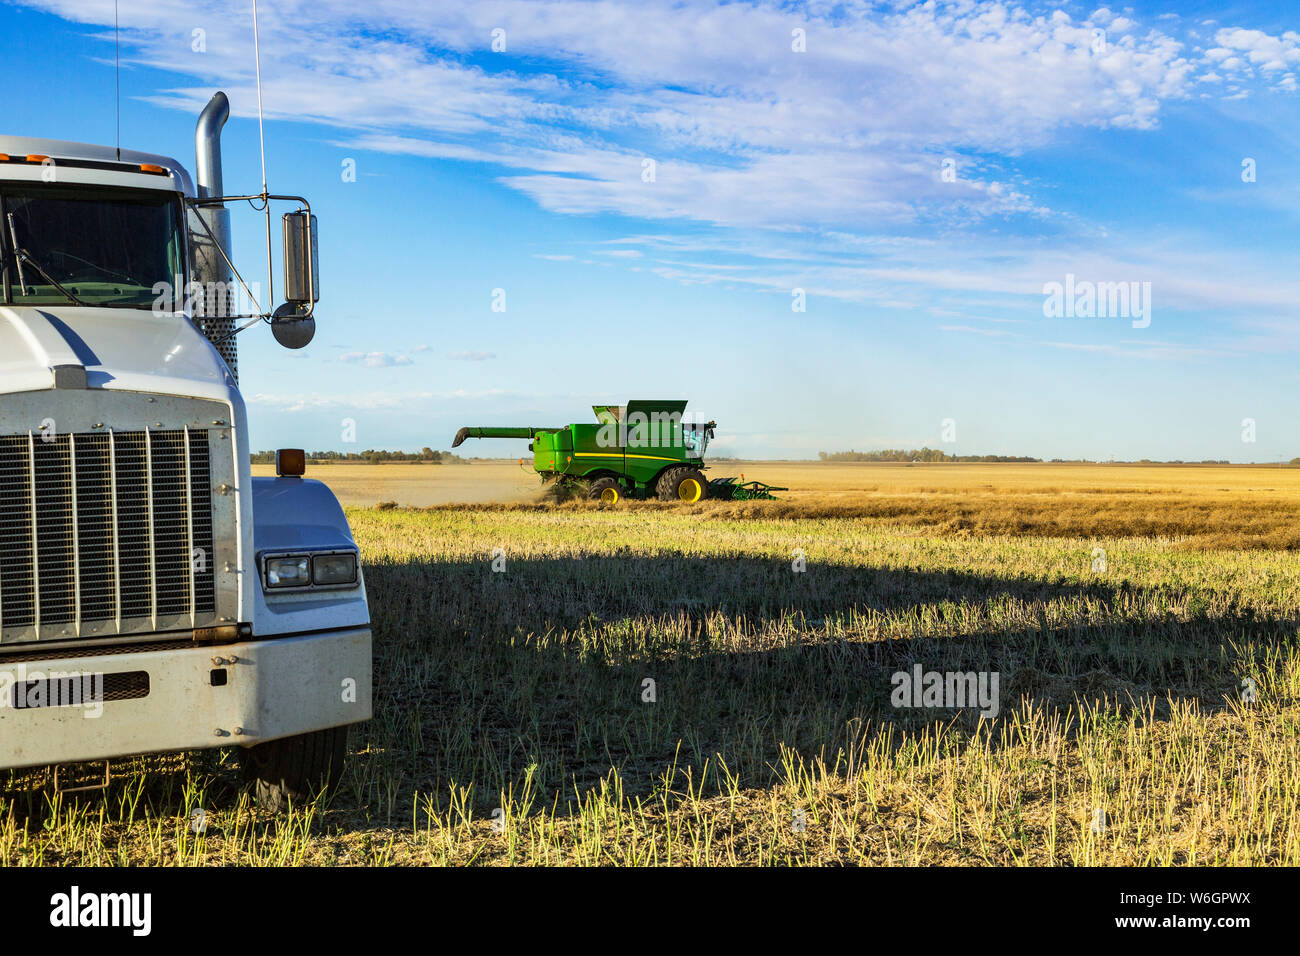 A grain truck waits for its next load during a canola harvest while a combine is at work in the field; Legal, Alberta, Canada Stock Photo